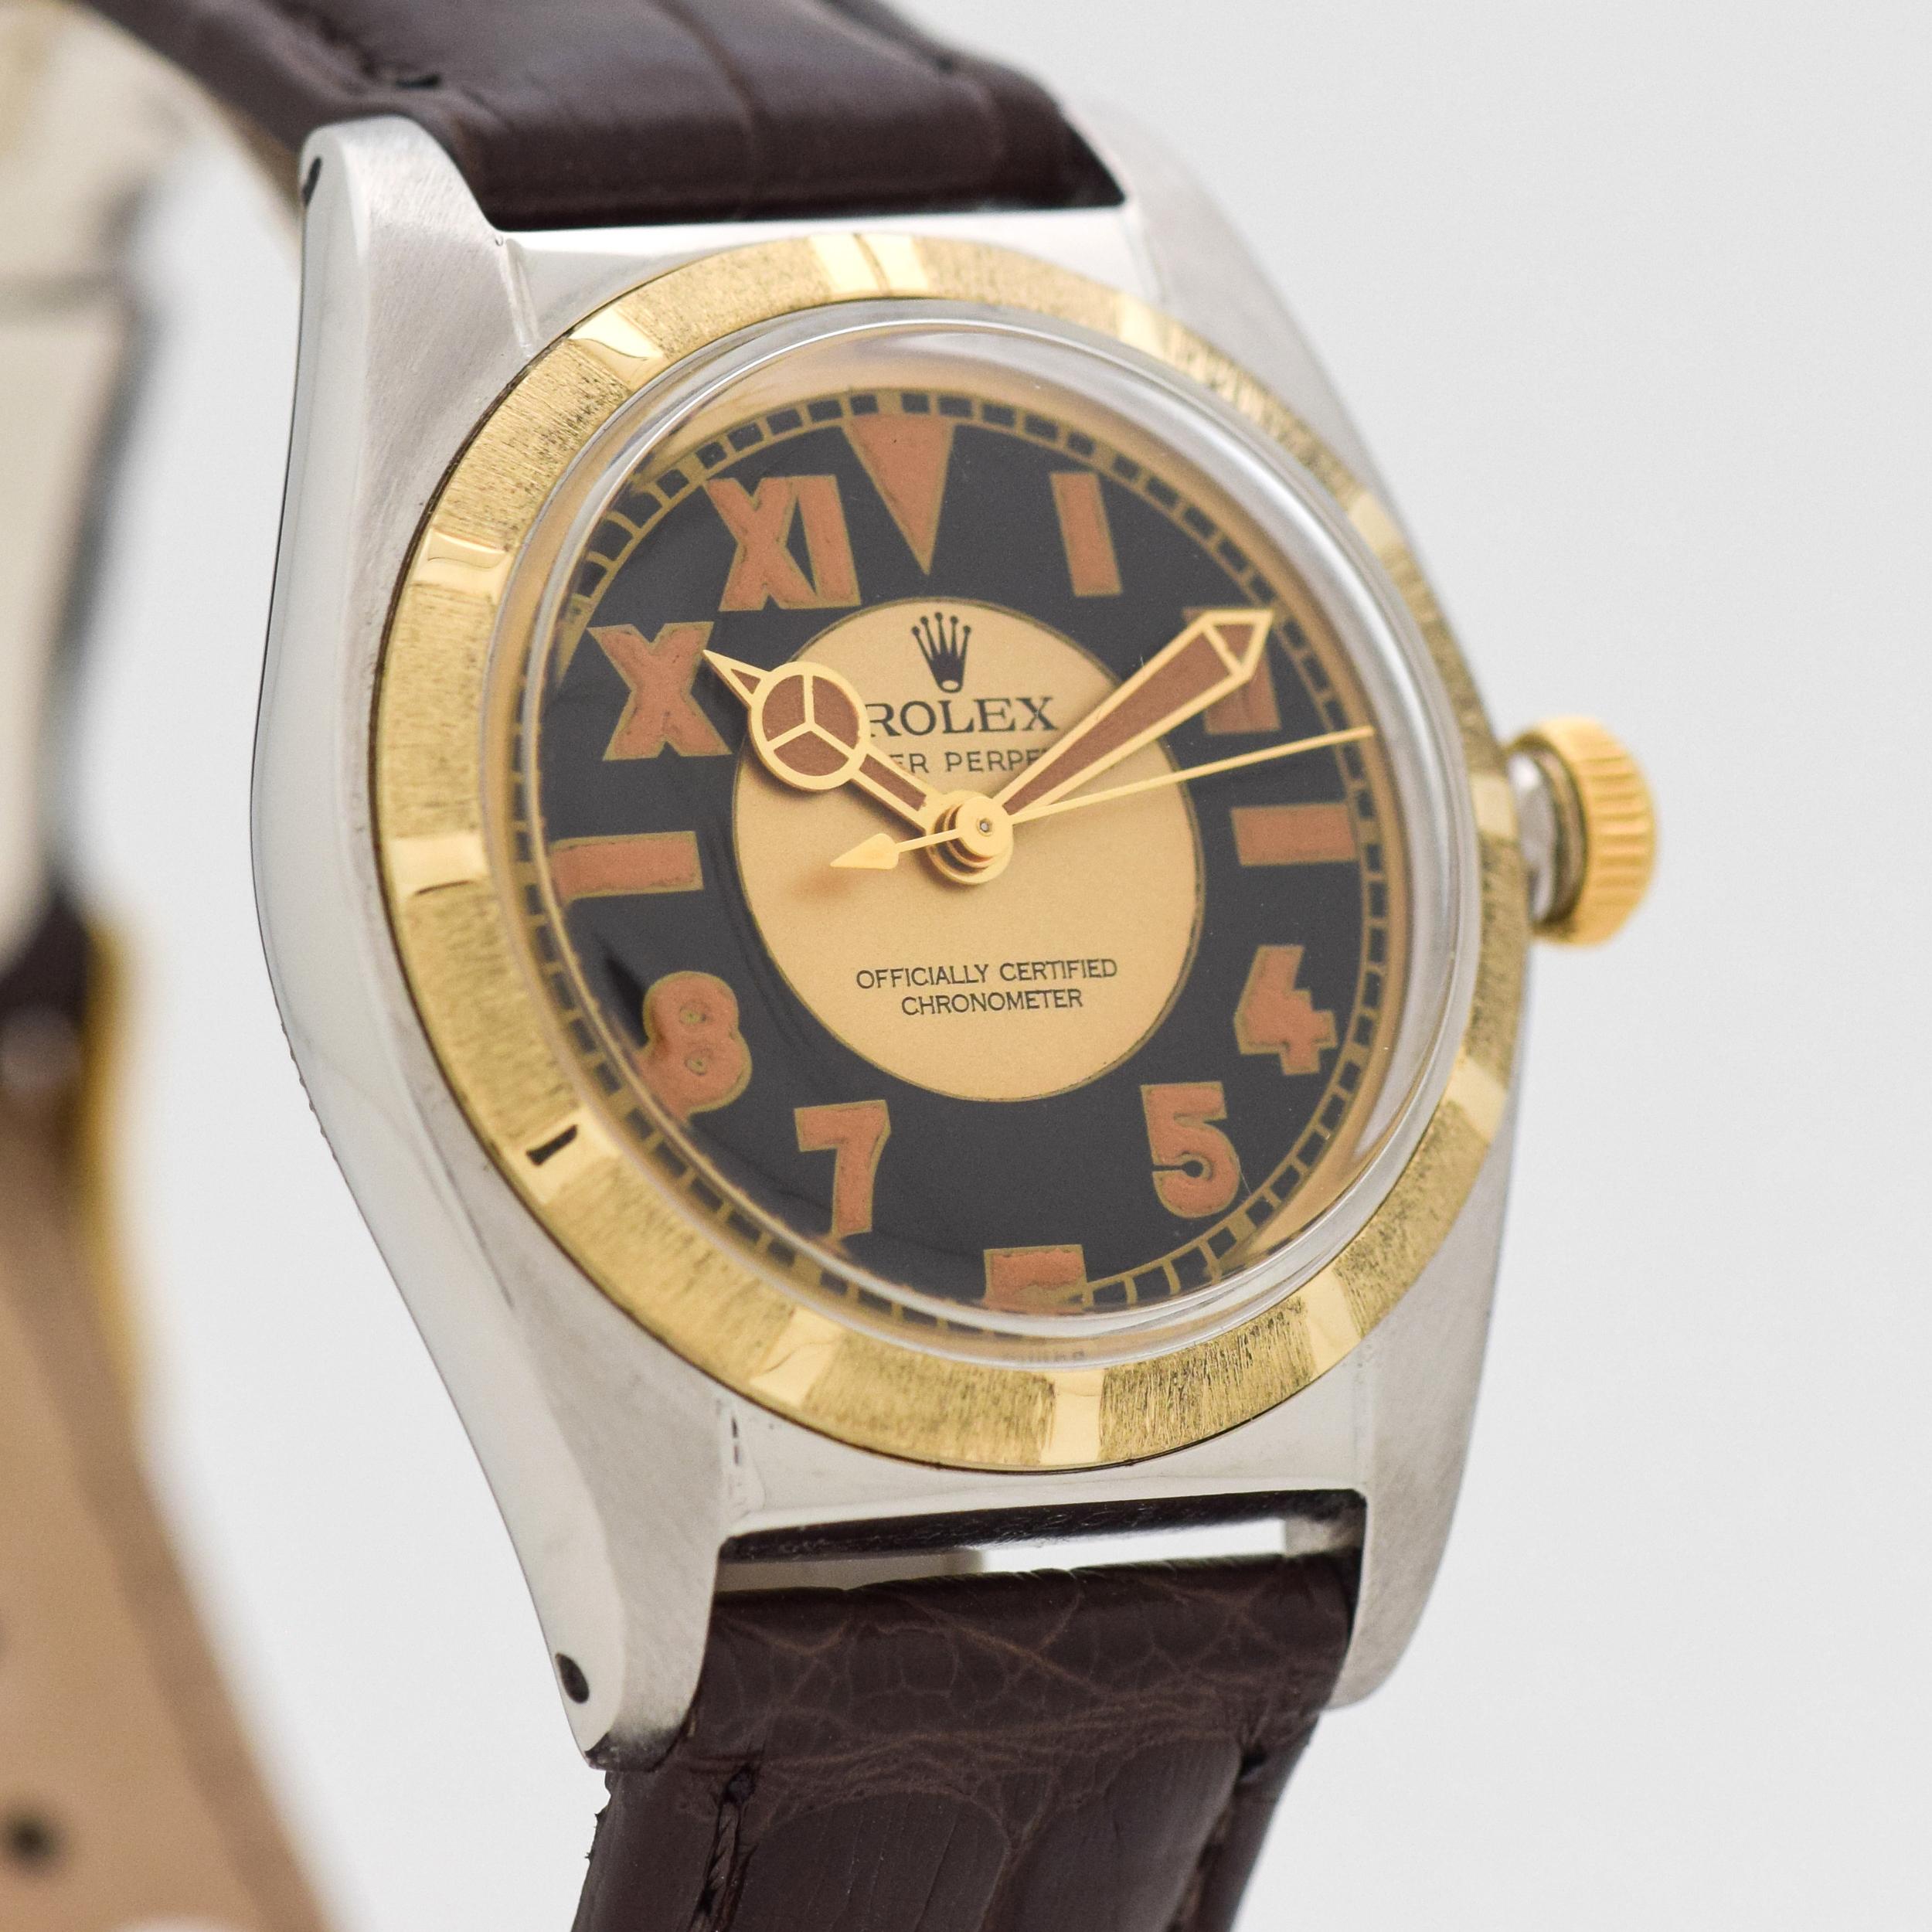 1948 Vintage Rolex Bubbleback Ref. 4392 Two Tone 14k Yellow Gold Machined Bezel and Stainless Steel watch with Two Tone Black and Gold Roman Arabic California Dial. 32mm x 38mm lug to lug (1.26 in. x 1.5 in.) - Powered by a 17 jewel, automatic